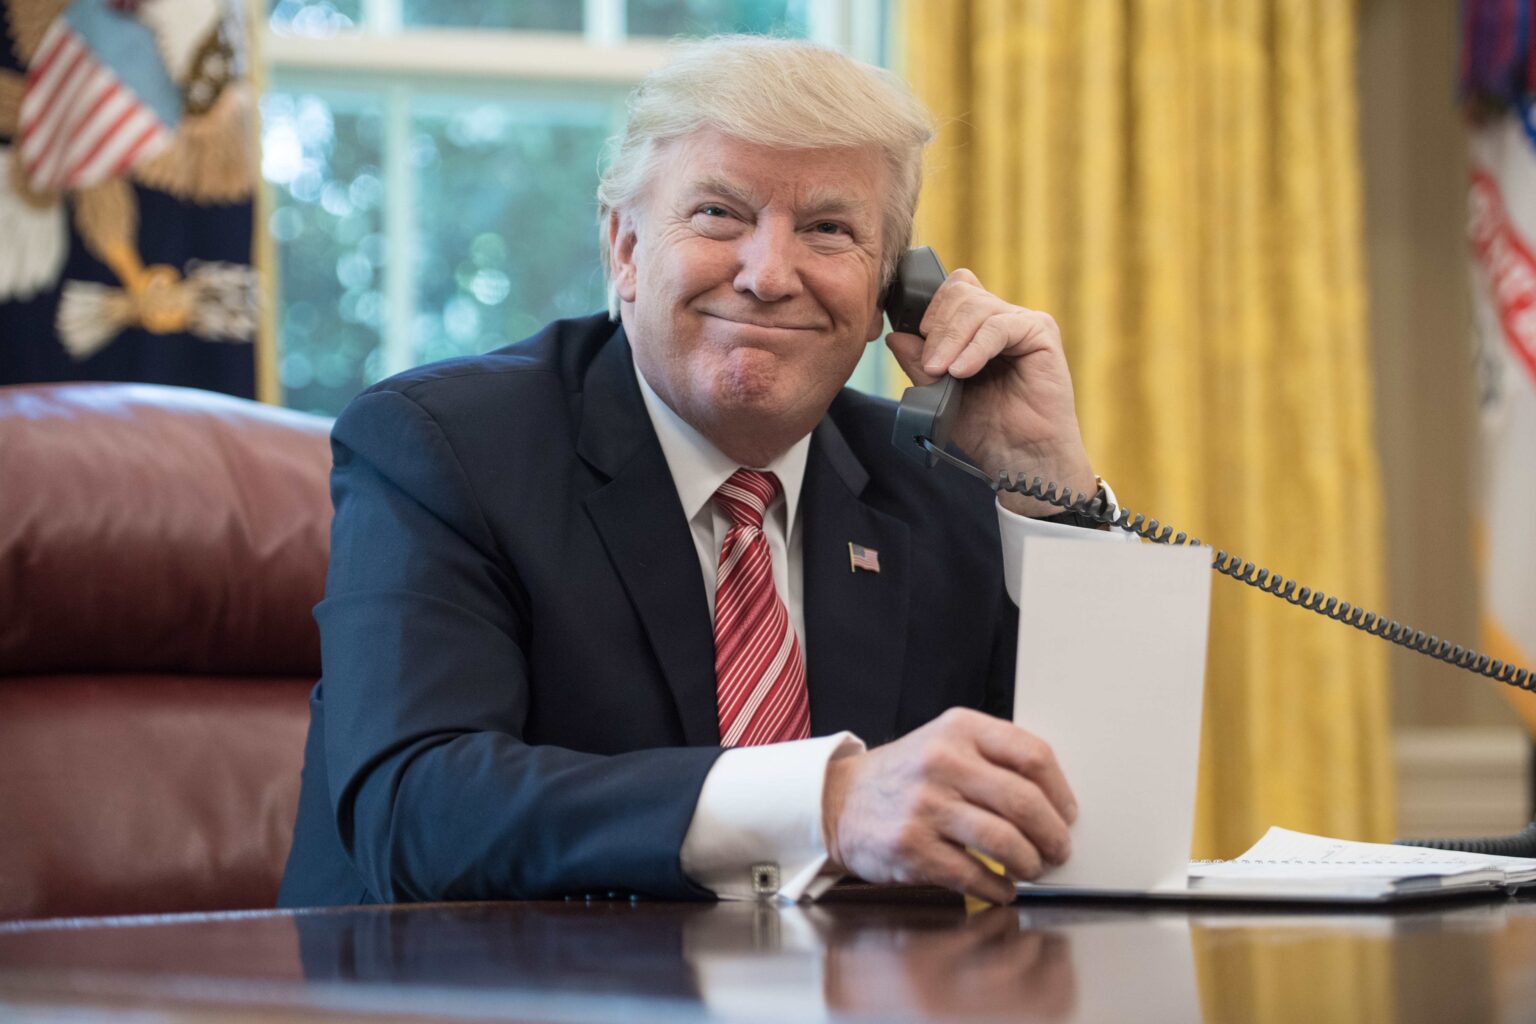 US President Donald Trump waits to speak on the phone with Irish Prime Minister Leo Varadkar to congratulate him on his recent election victory in the Oval Office at the White House in Washington, DC, on June 27, 2017 - Photo Credit [NICHOLAS KAMM/AFP via Getty Images]